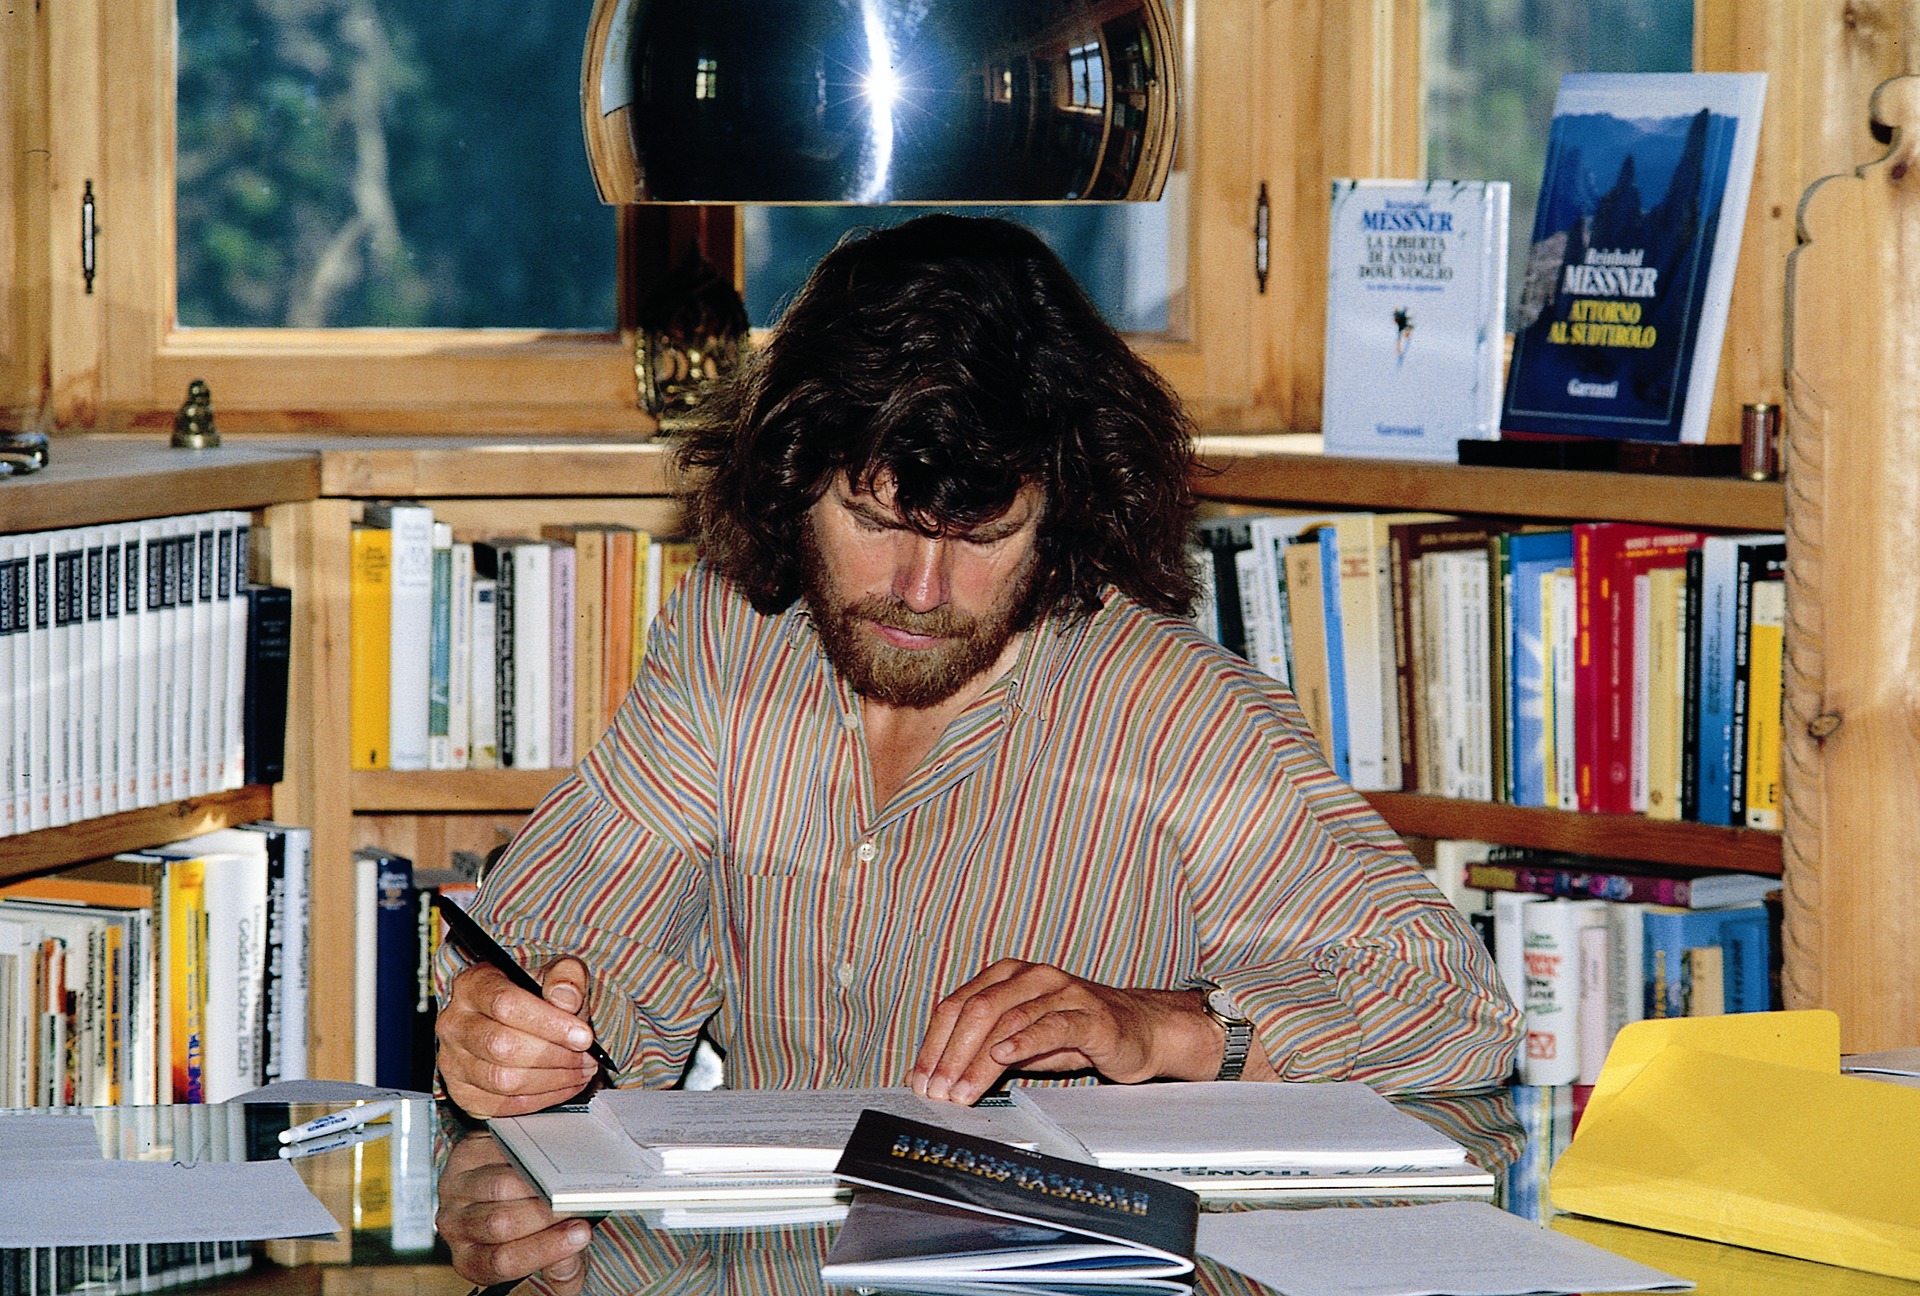 messner working at Juval Castle (1994) / Photo credit